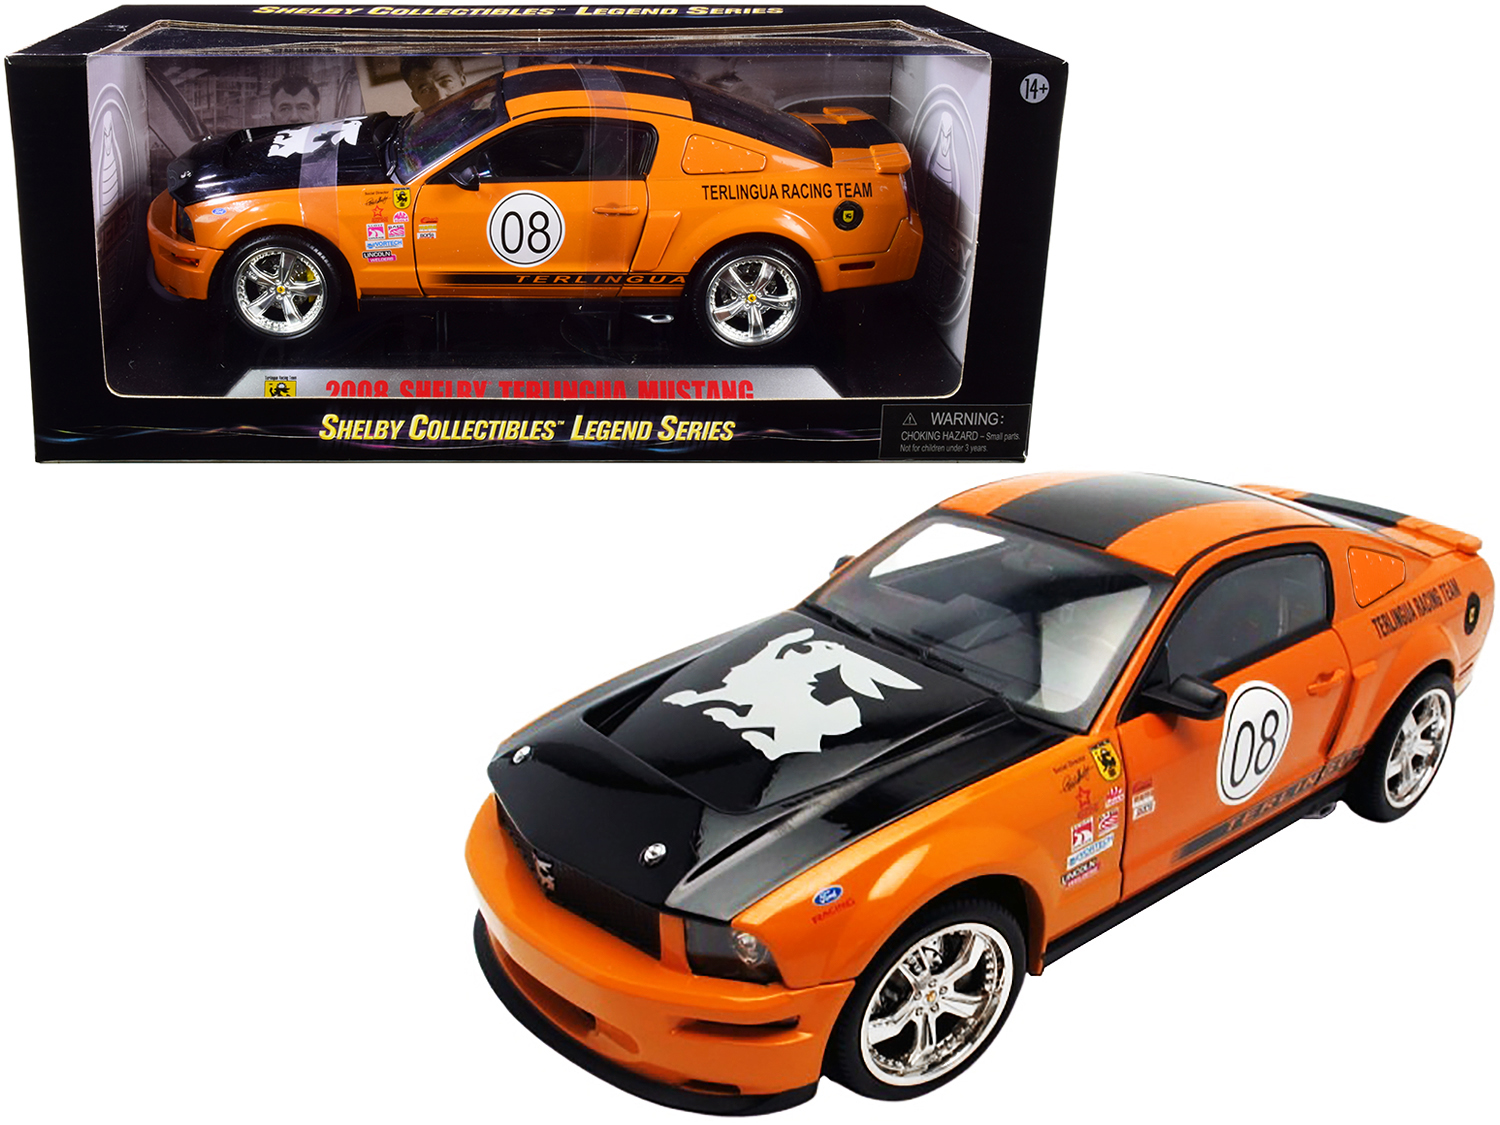 SHELBY COLLECTIBLES 2008 Ford Shelby Mustang #08 "Terlingua" Orange & Black "Shelby Collectibles Legend" 1/18 Diecast Model by Shelby Collectibles